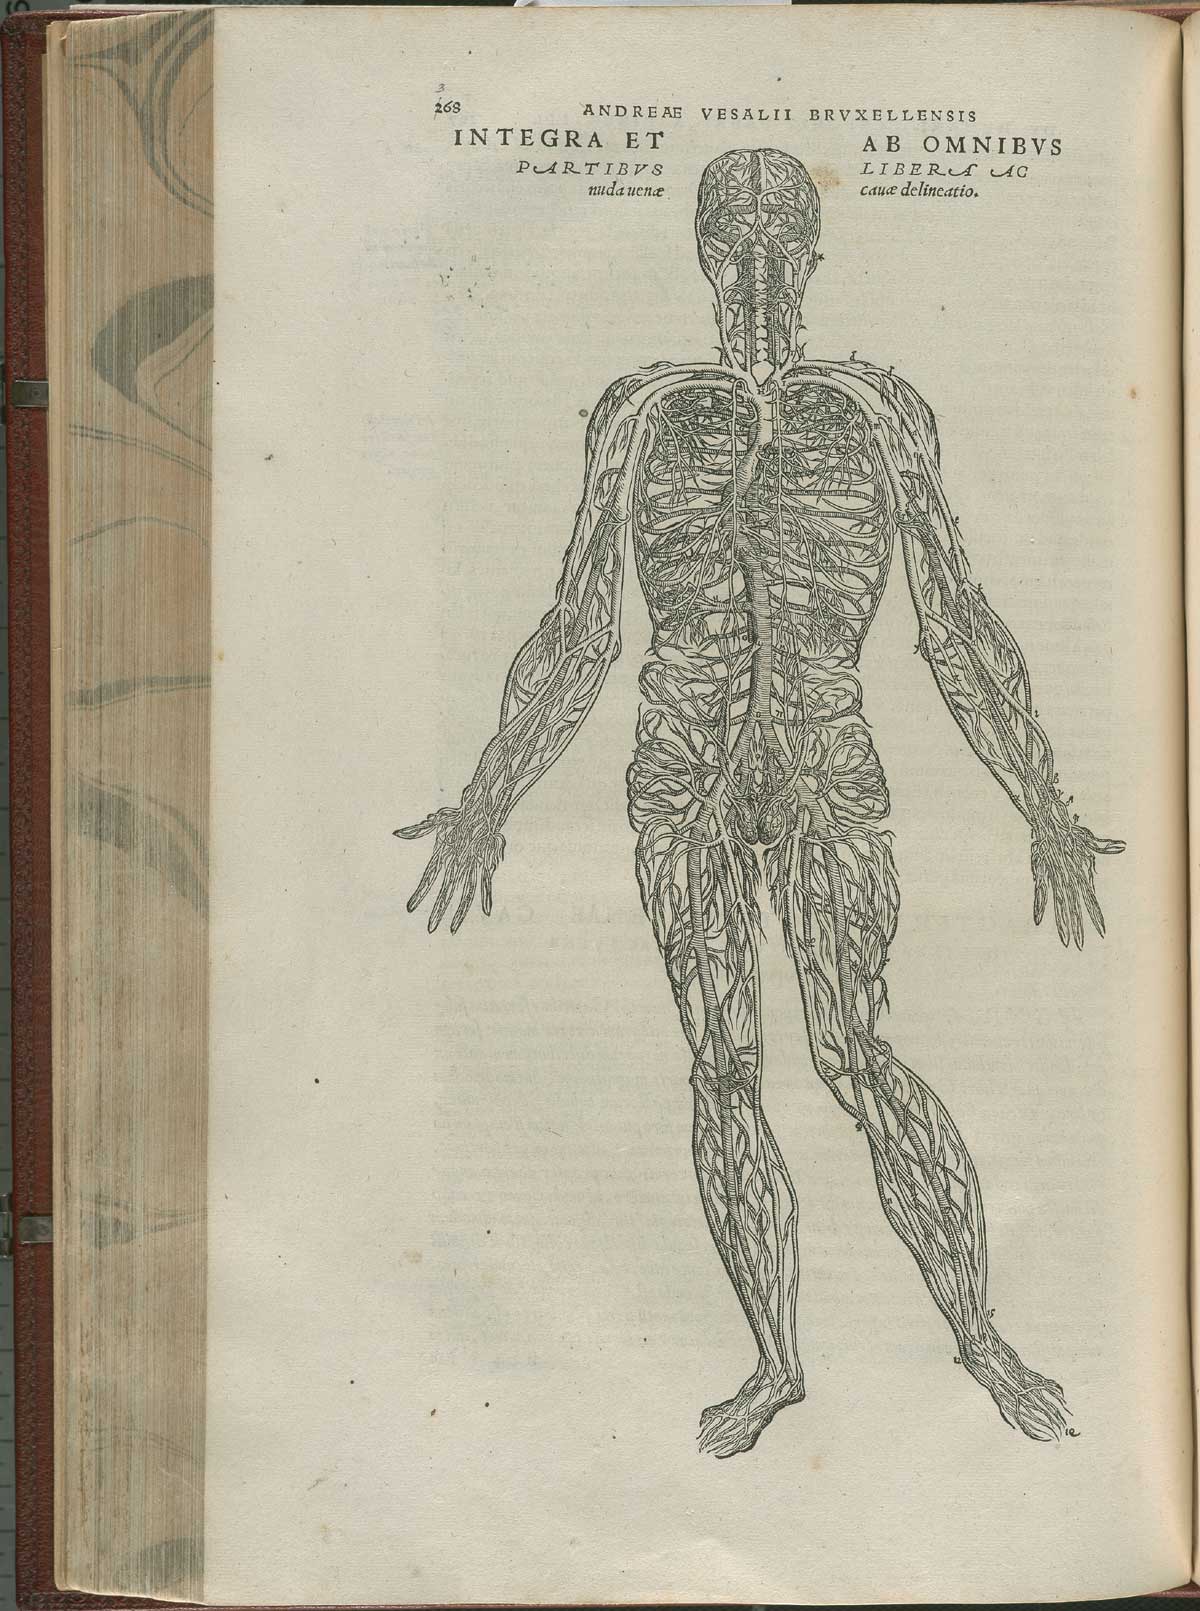 Page 368 of Andreas Vesalius' De corporis humani fabrica libri septem, featuring the illustrated woodcut of the full-length view of the body's vascular system.